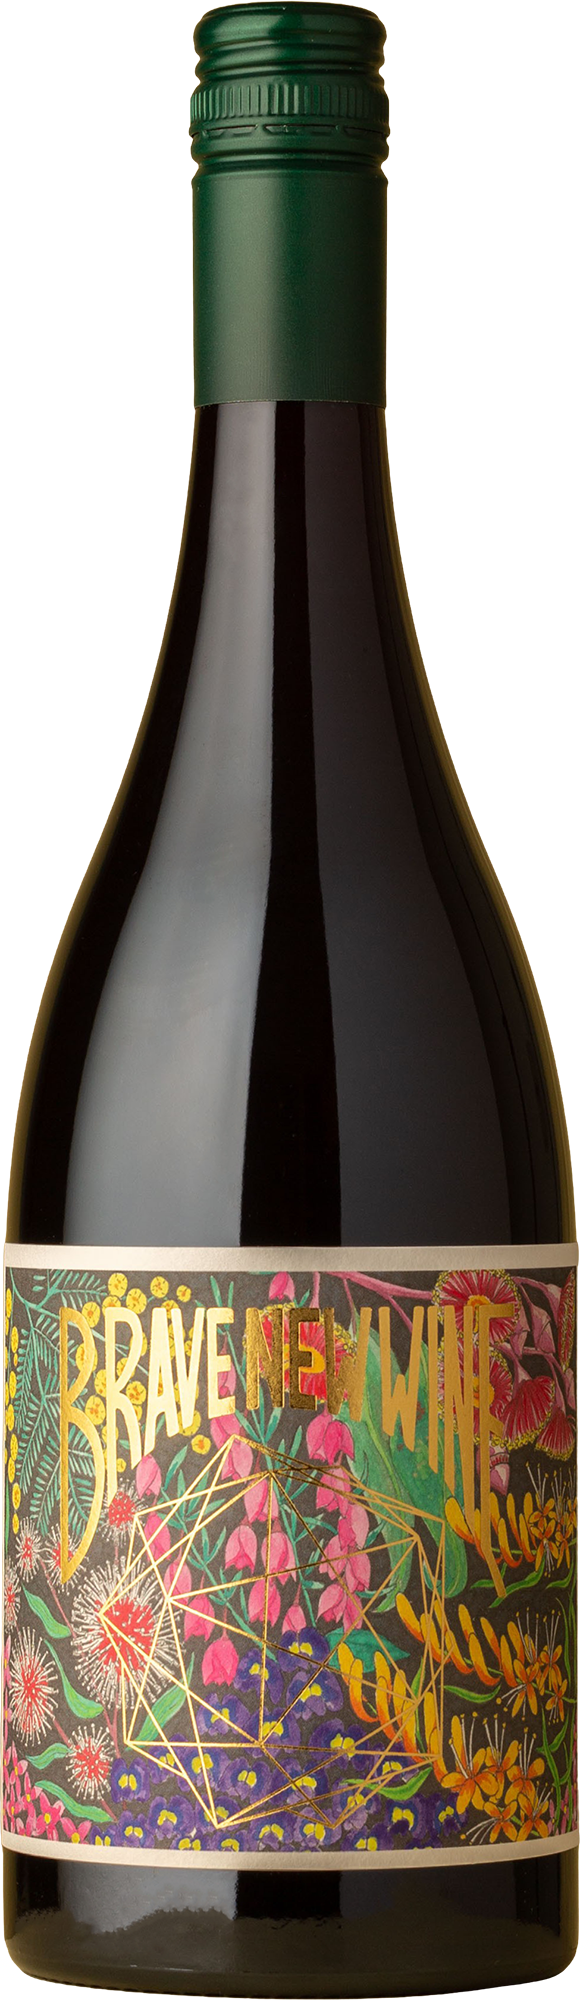 Brave New Wine - Pi-Oui Pinot Noir 2020 Red Wine